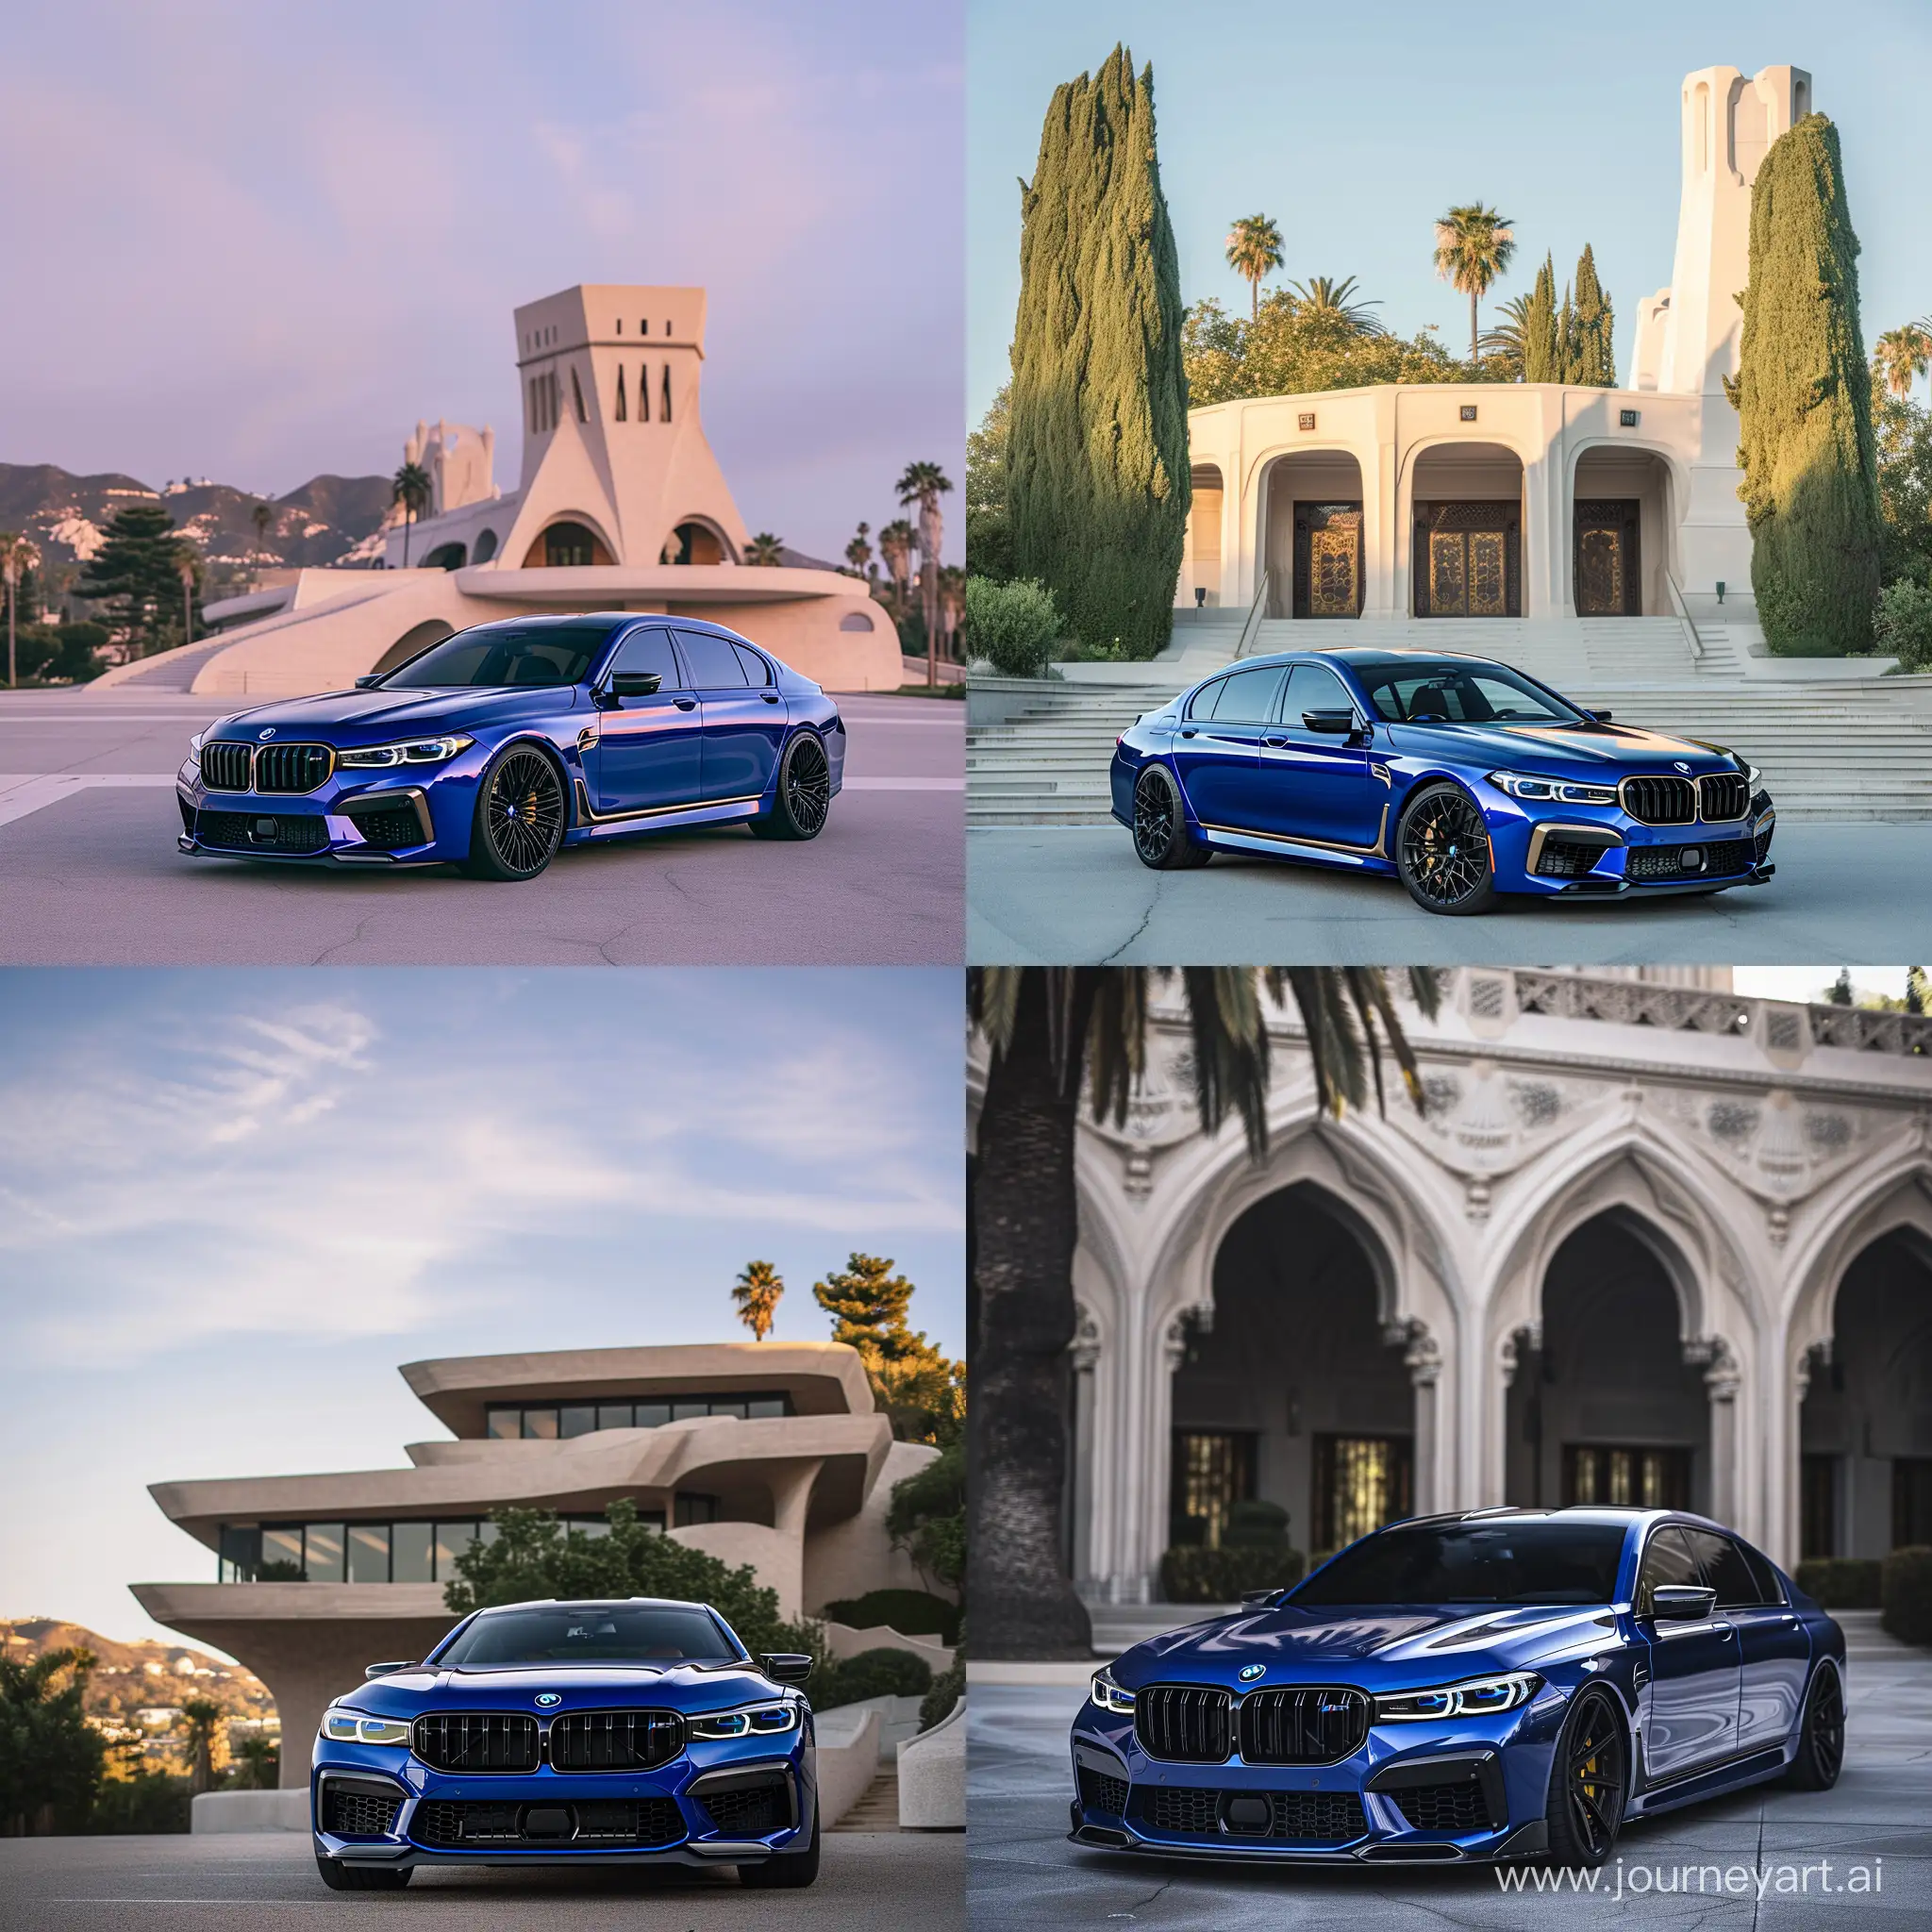 Professional Photography of: Blue BMW M7 Parking Front The Luxury Building Designed by Richard Neutra, Natural Details and High Precision, Upscale to 8k